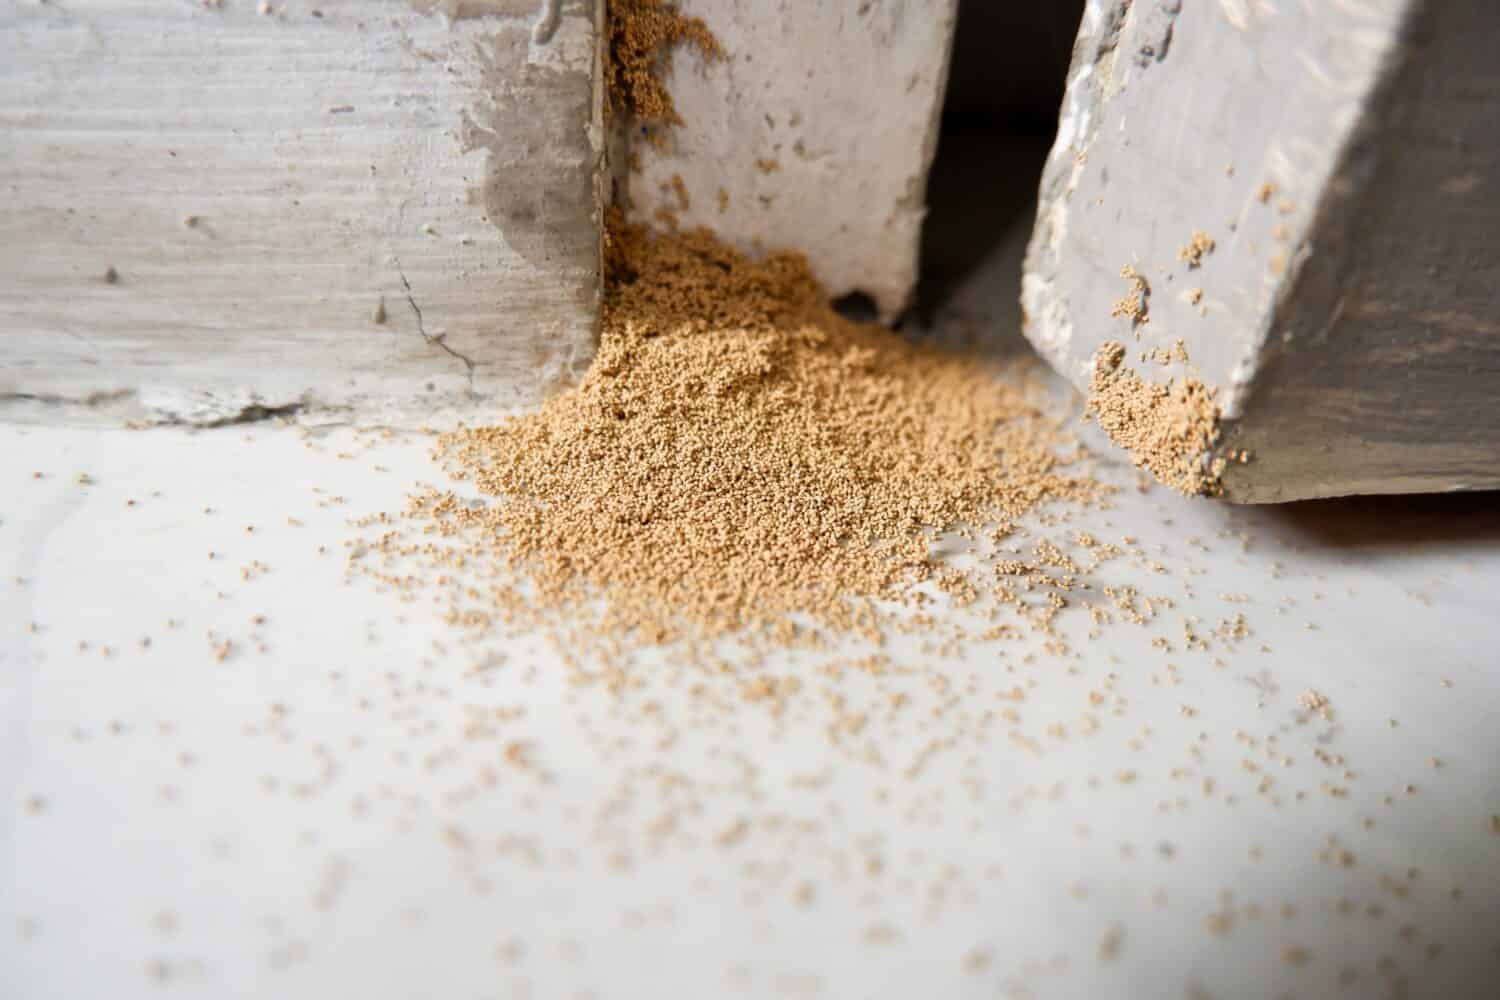 frass derived from drywood termite droppings, Cryptotermes spp. Granul oval pellets on door frames